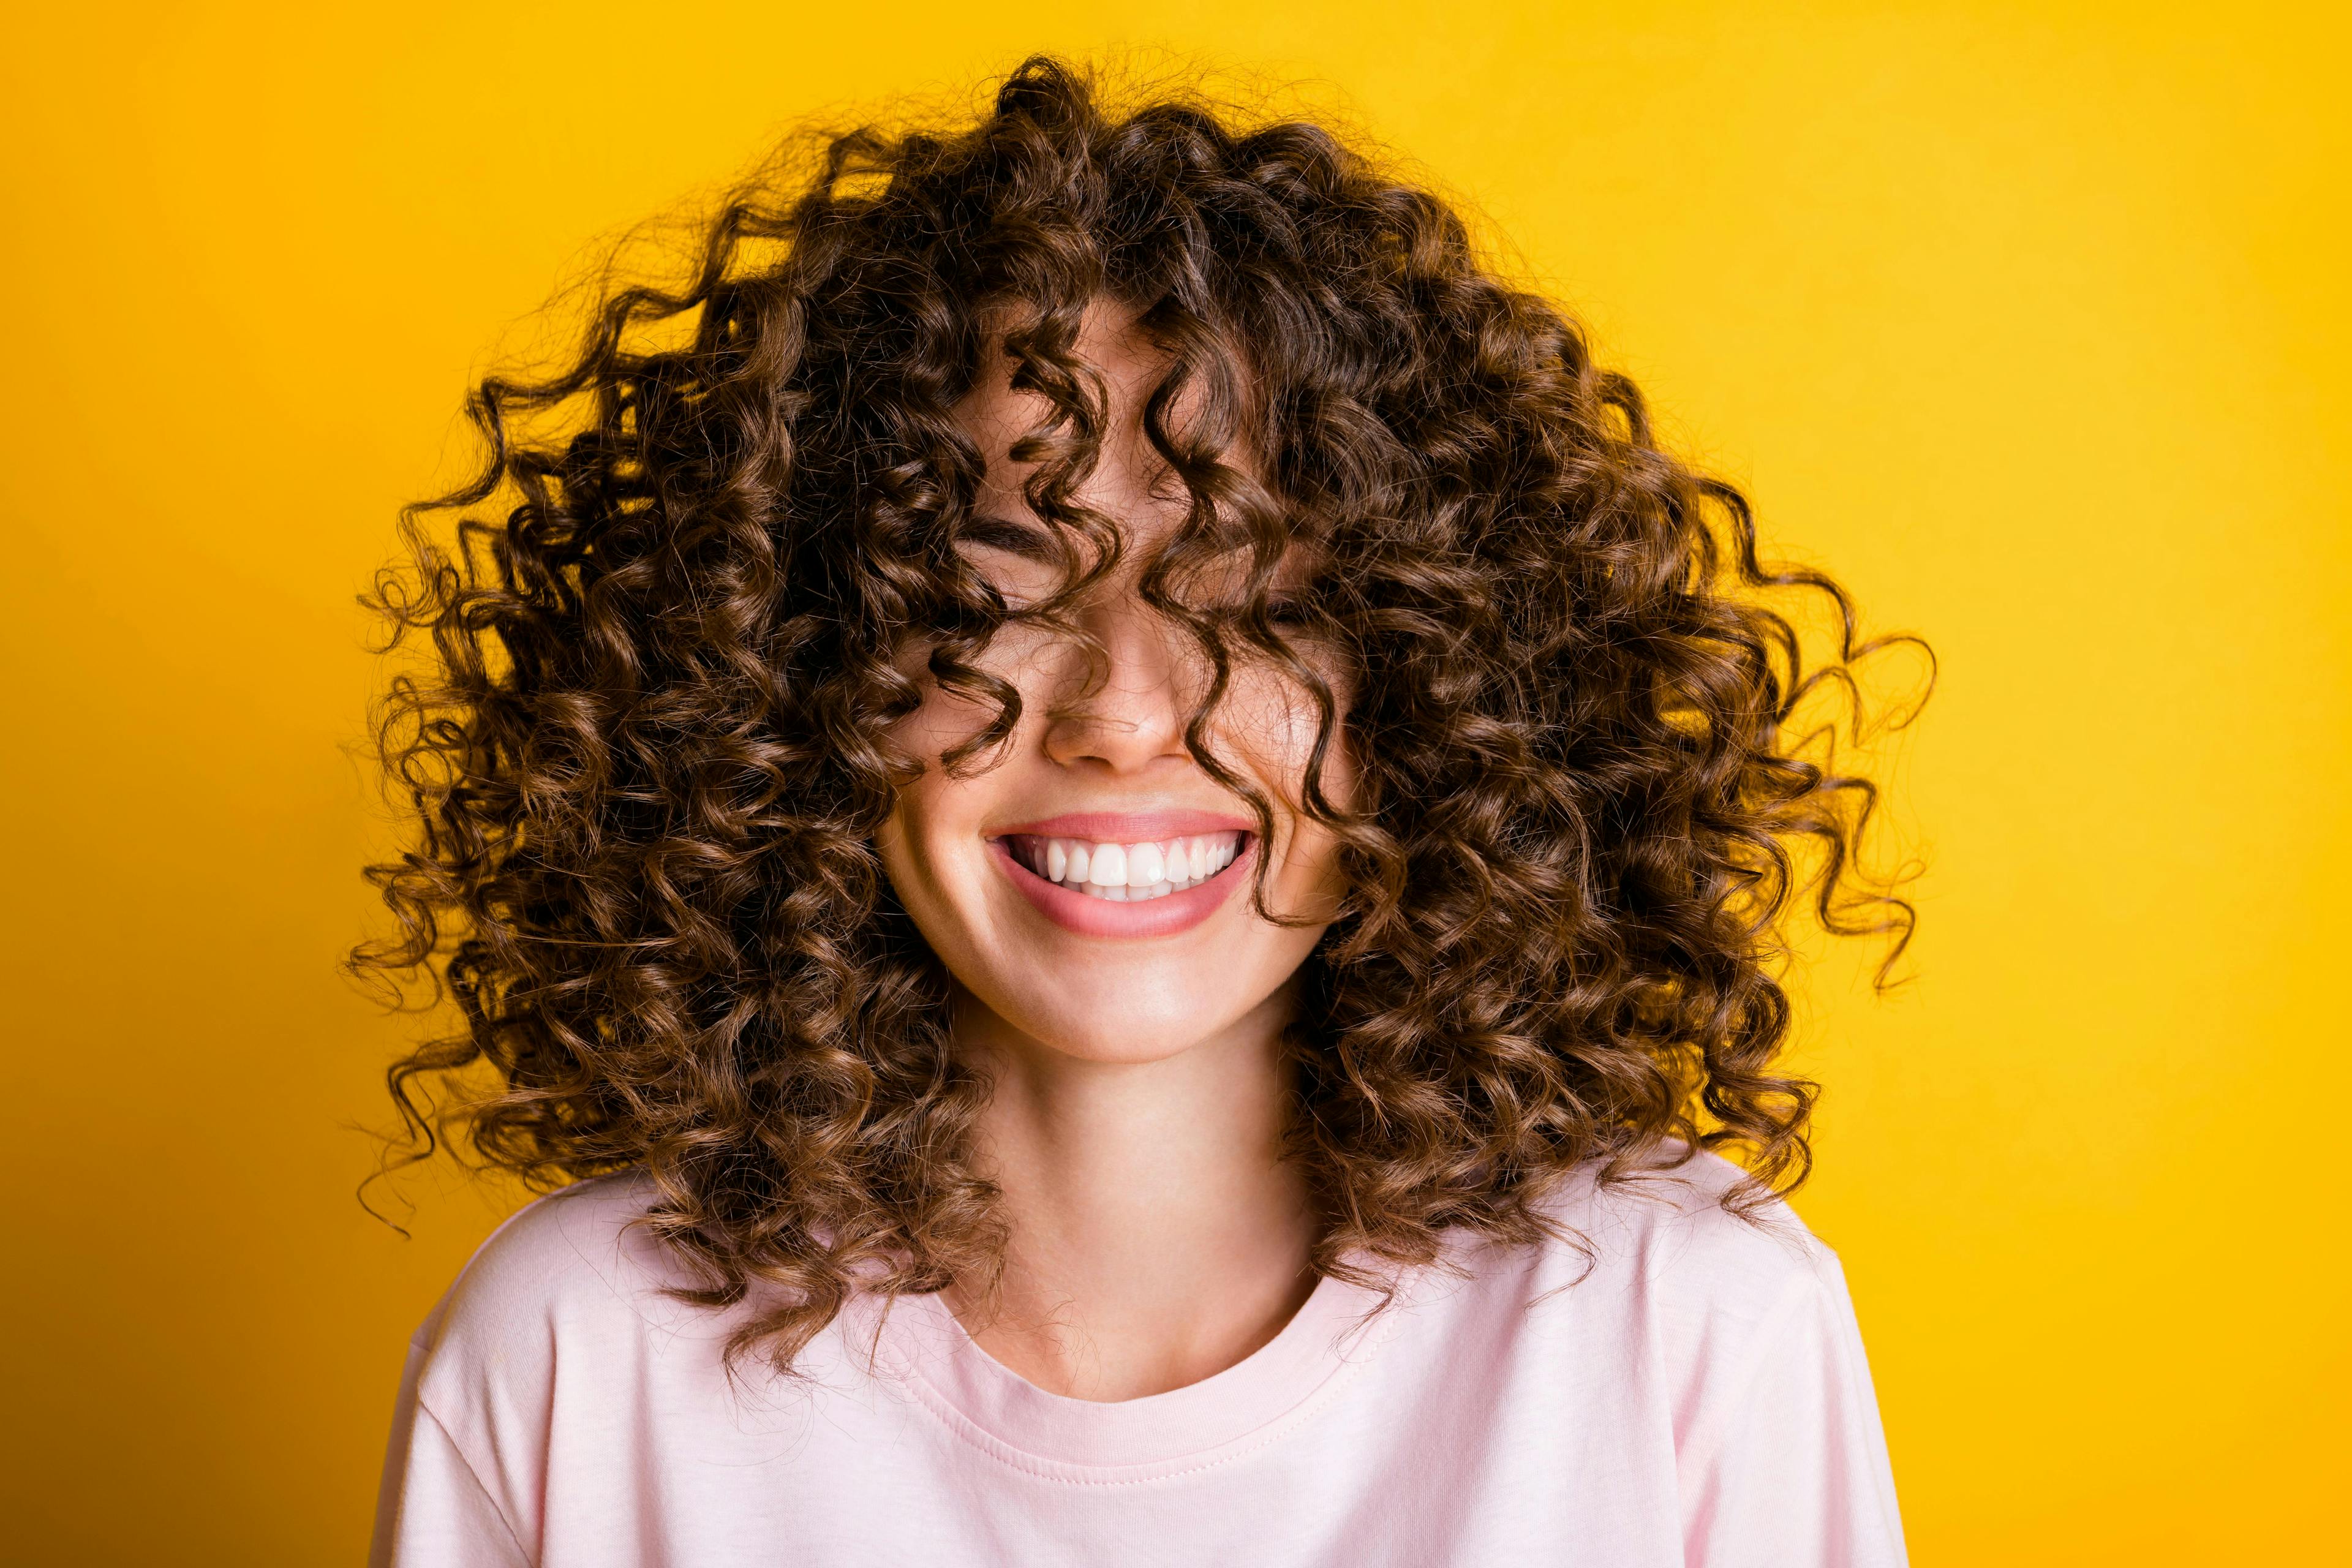 happy,conditioner,good,smile,beautiful,trendy,casual,model,female,laugh,cheerful,haircare,haircut,girl,hairstyle,volume,whitening,careless,veneers,rejoice,style,laughter,salon,overjoyed,treatment,pink,woman,mood,dentistry,student,young,bright,yellow,summer,hair,joy,brunette,leisure,expression,curly,carefree,curls,lifestyle,stylish,face,emotion,toothy,fun,fashion,t-shirt